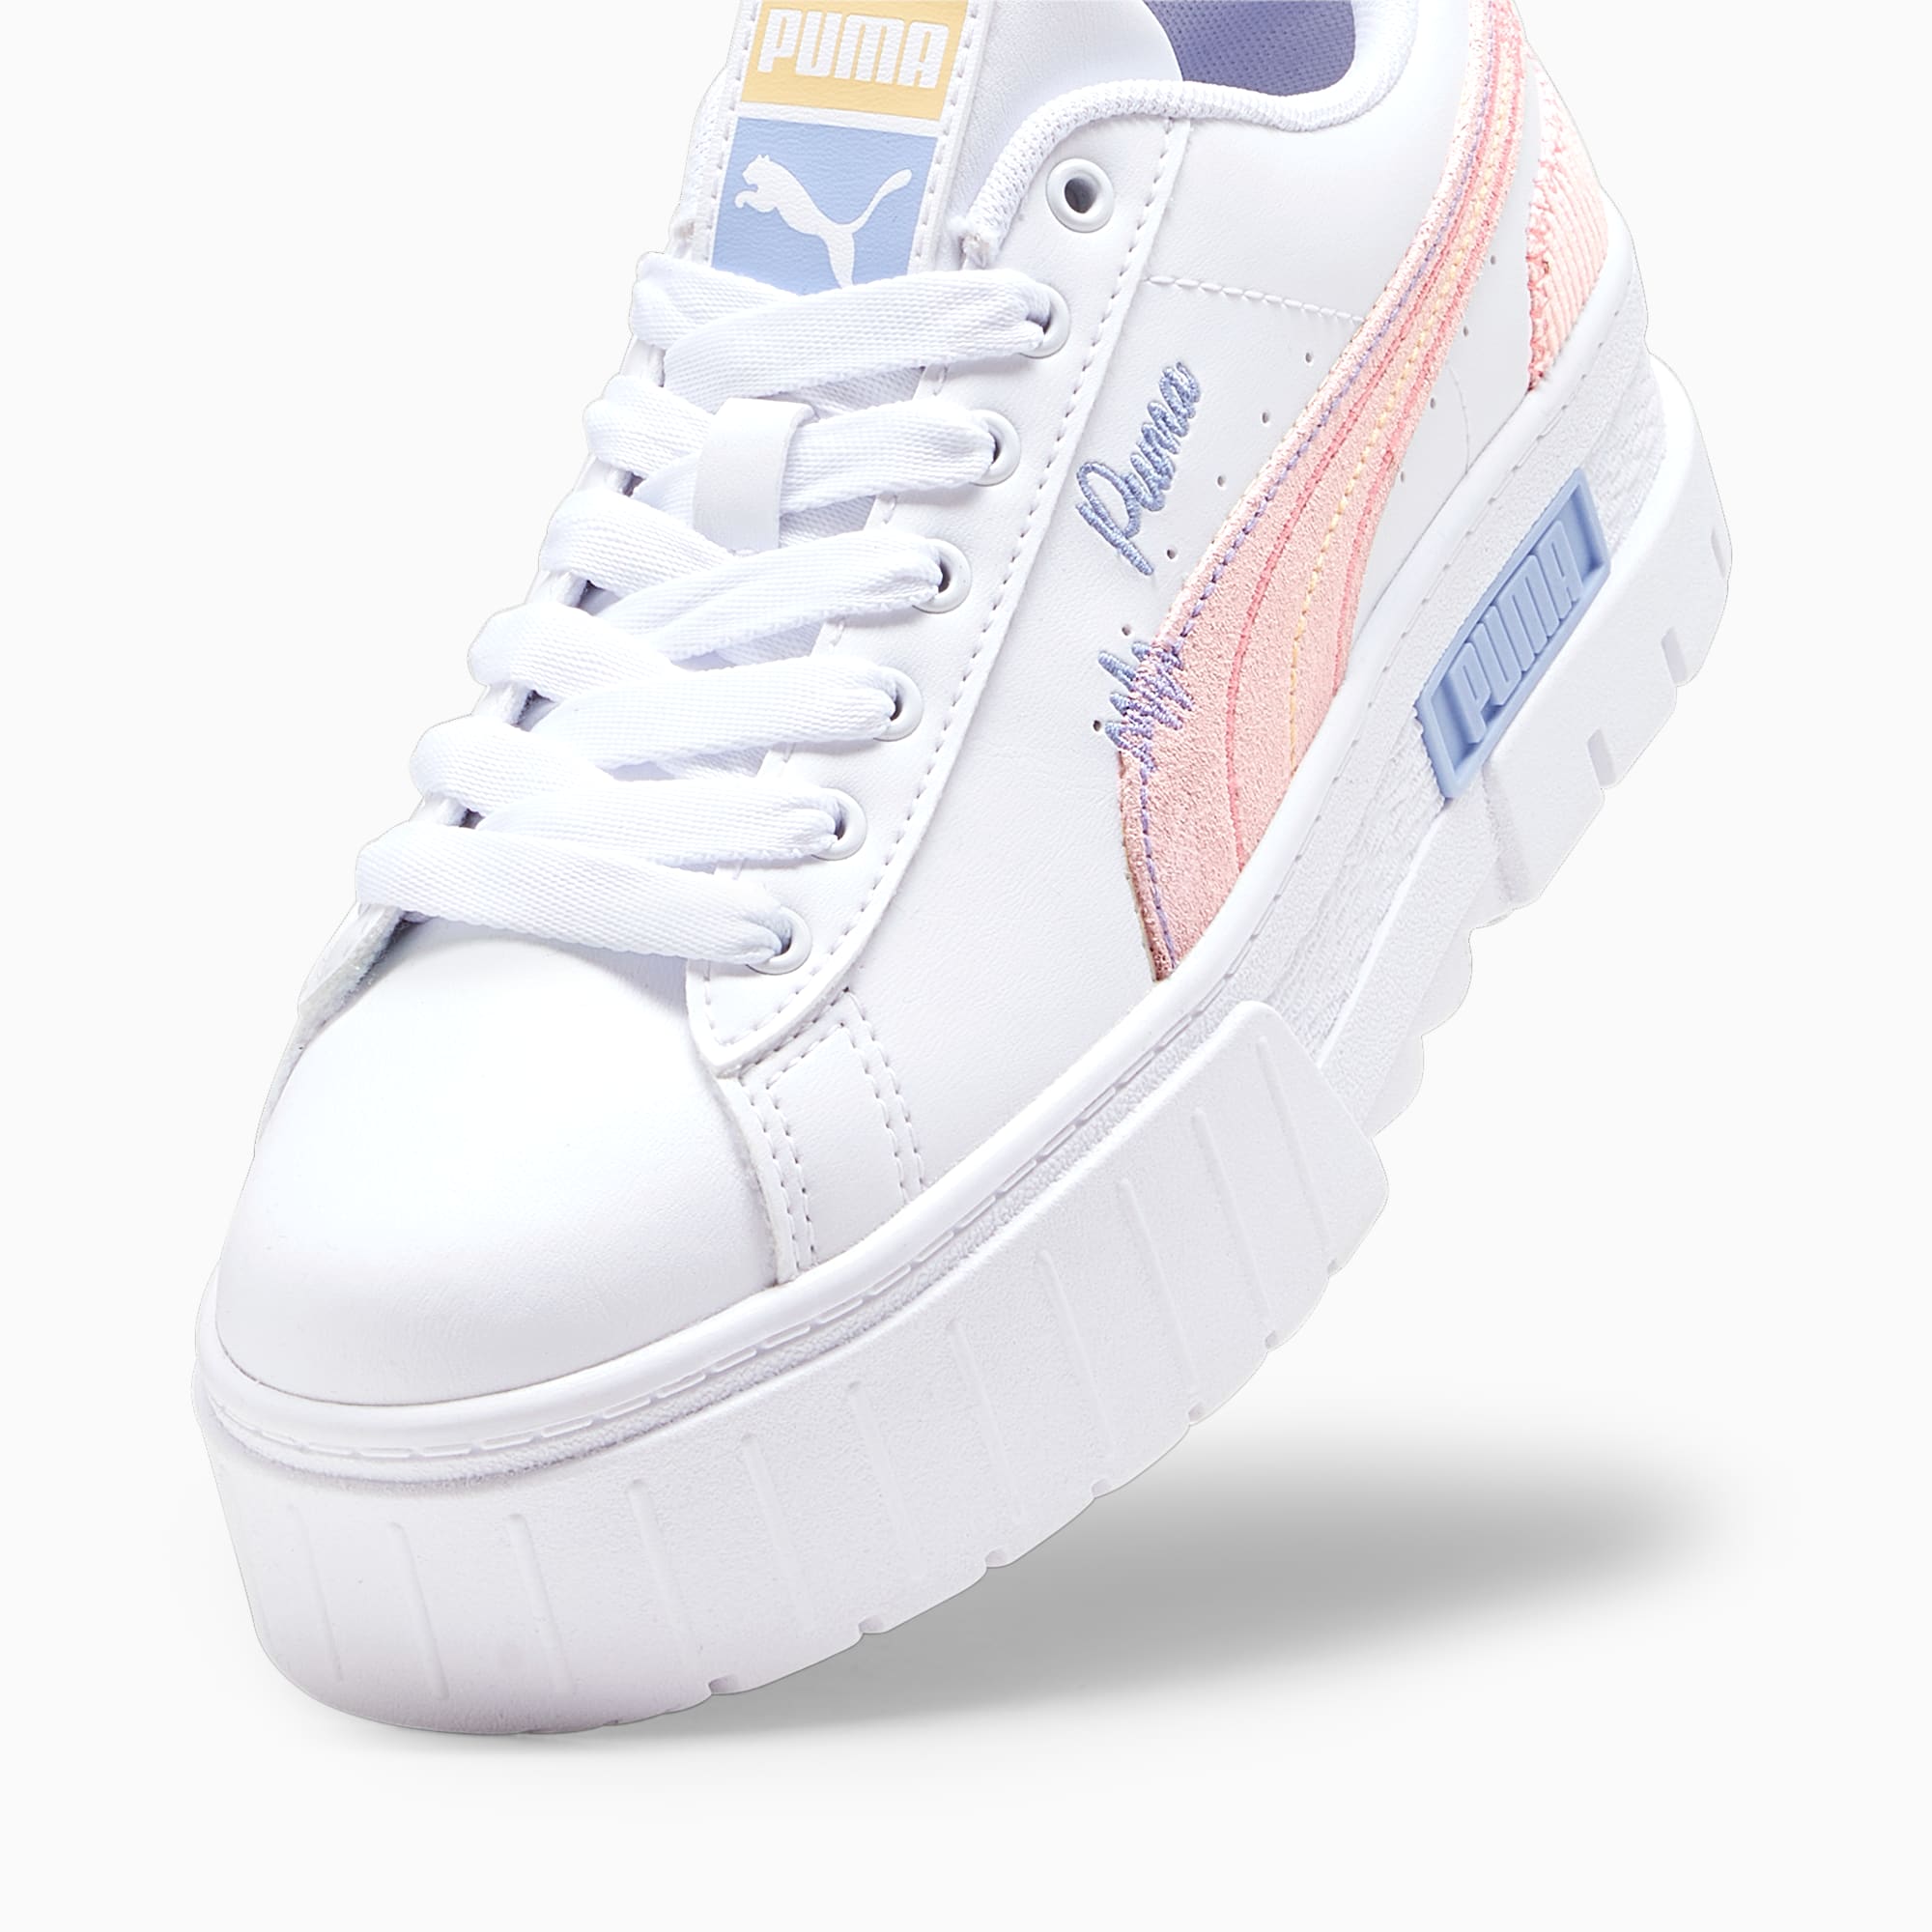 PUMA Mayze Sweater Weather Youth Sneakers, White/Blissful Blue/Peach Smoothie